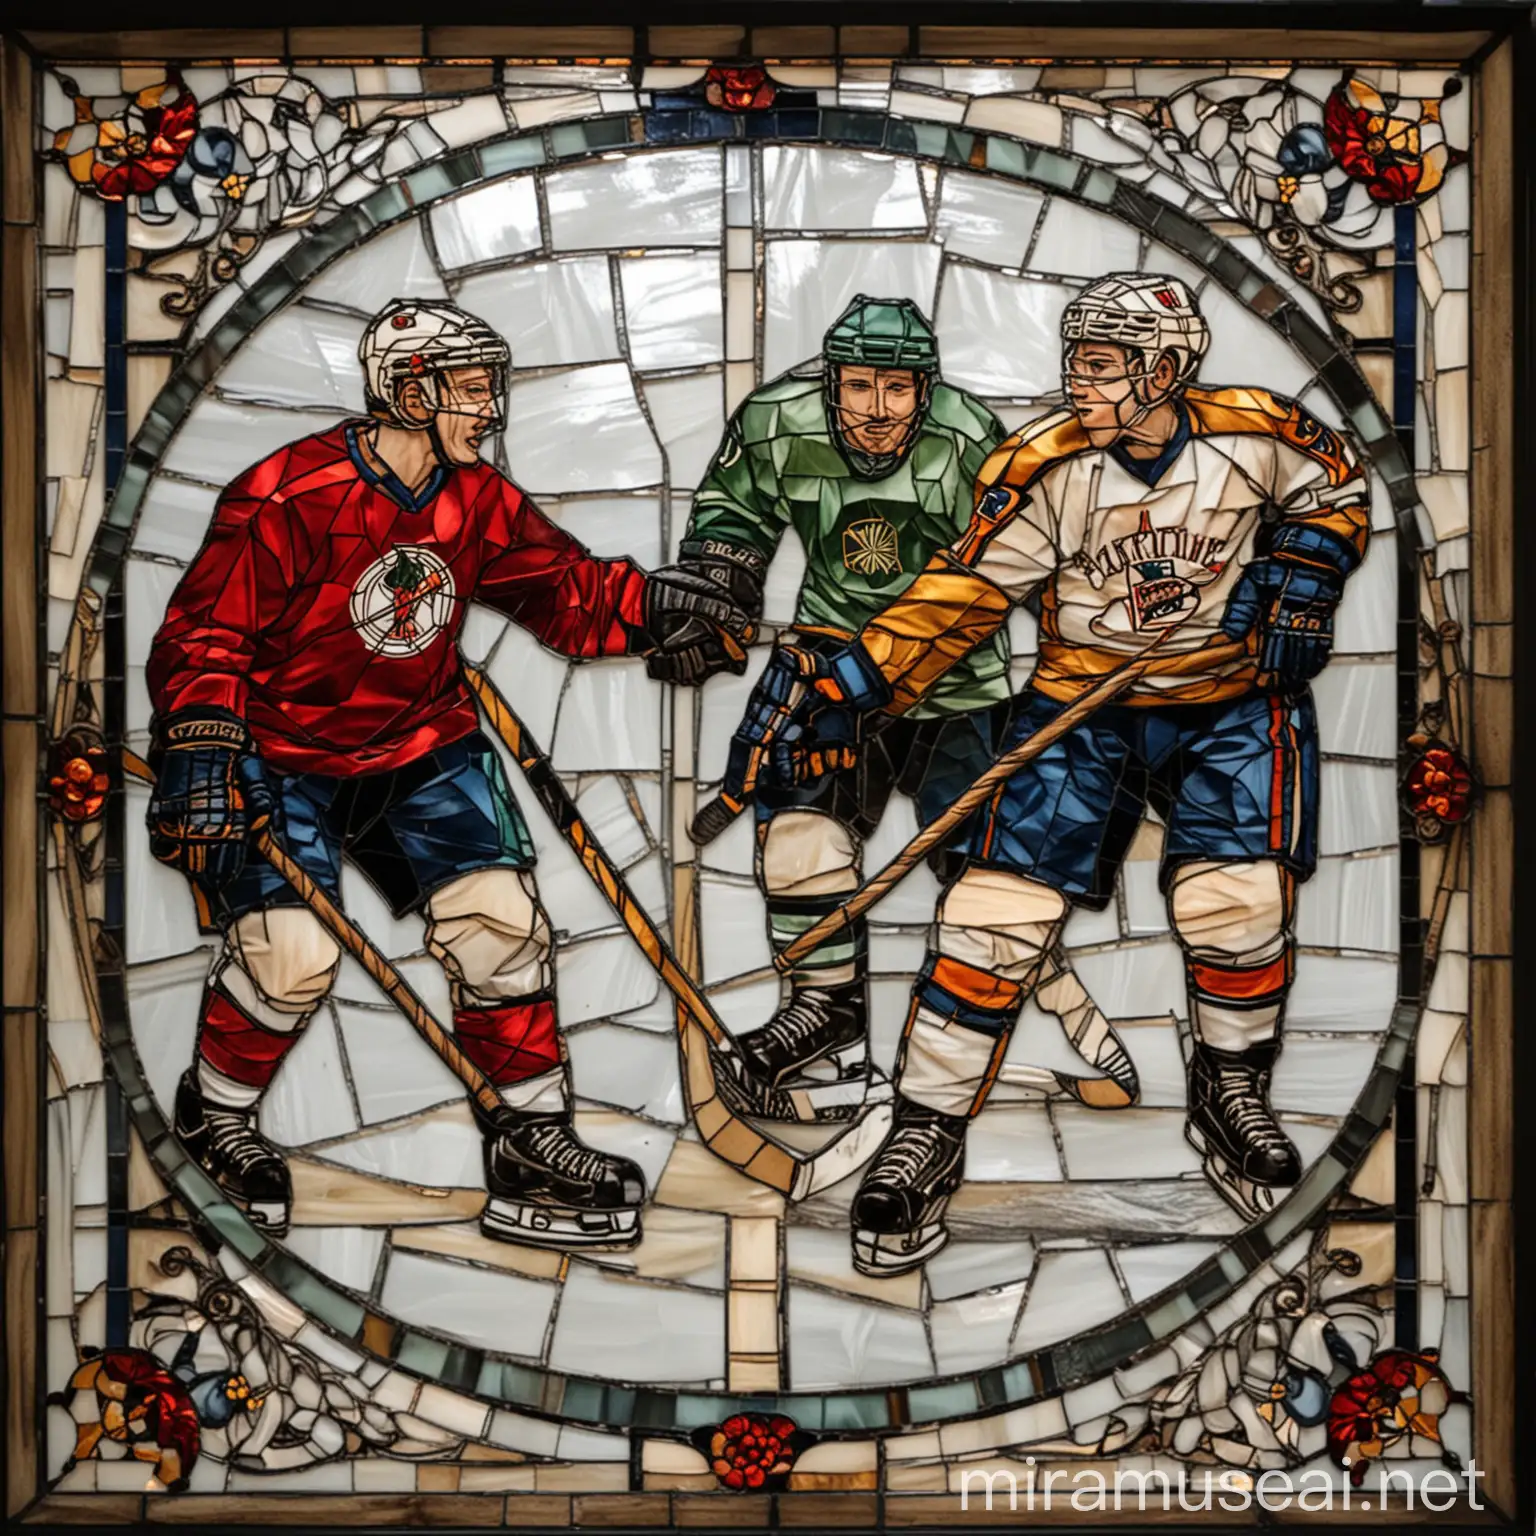 Stained glass mosaic, depicting hockey players playing hockey